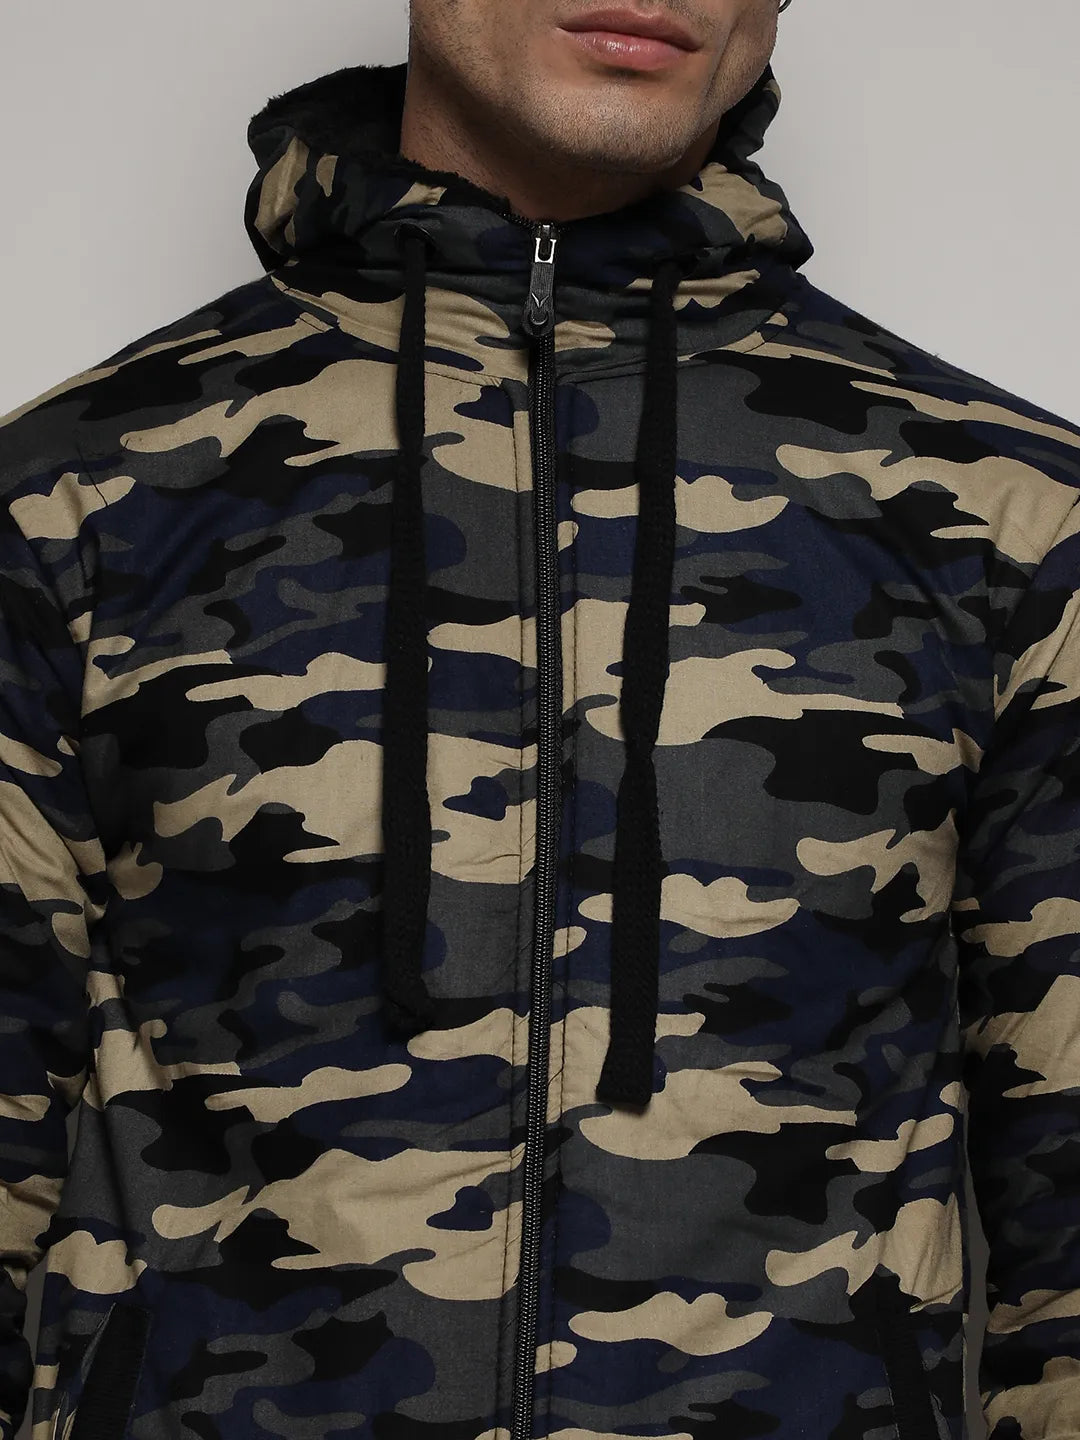 Navy Blue Camouflage Hoodie With Insert Pocket